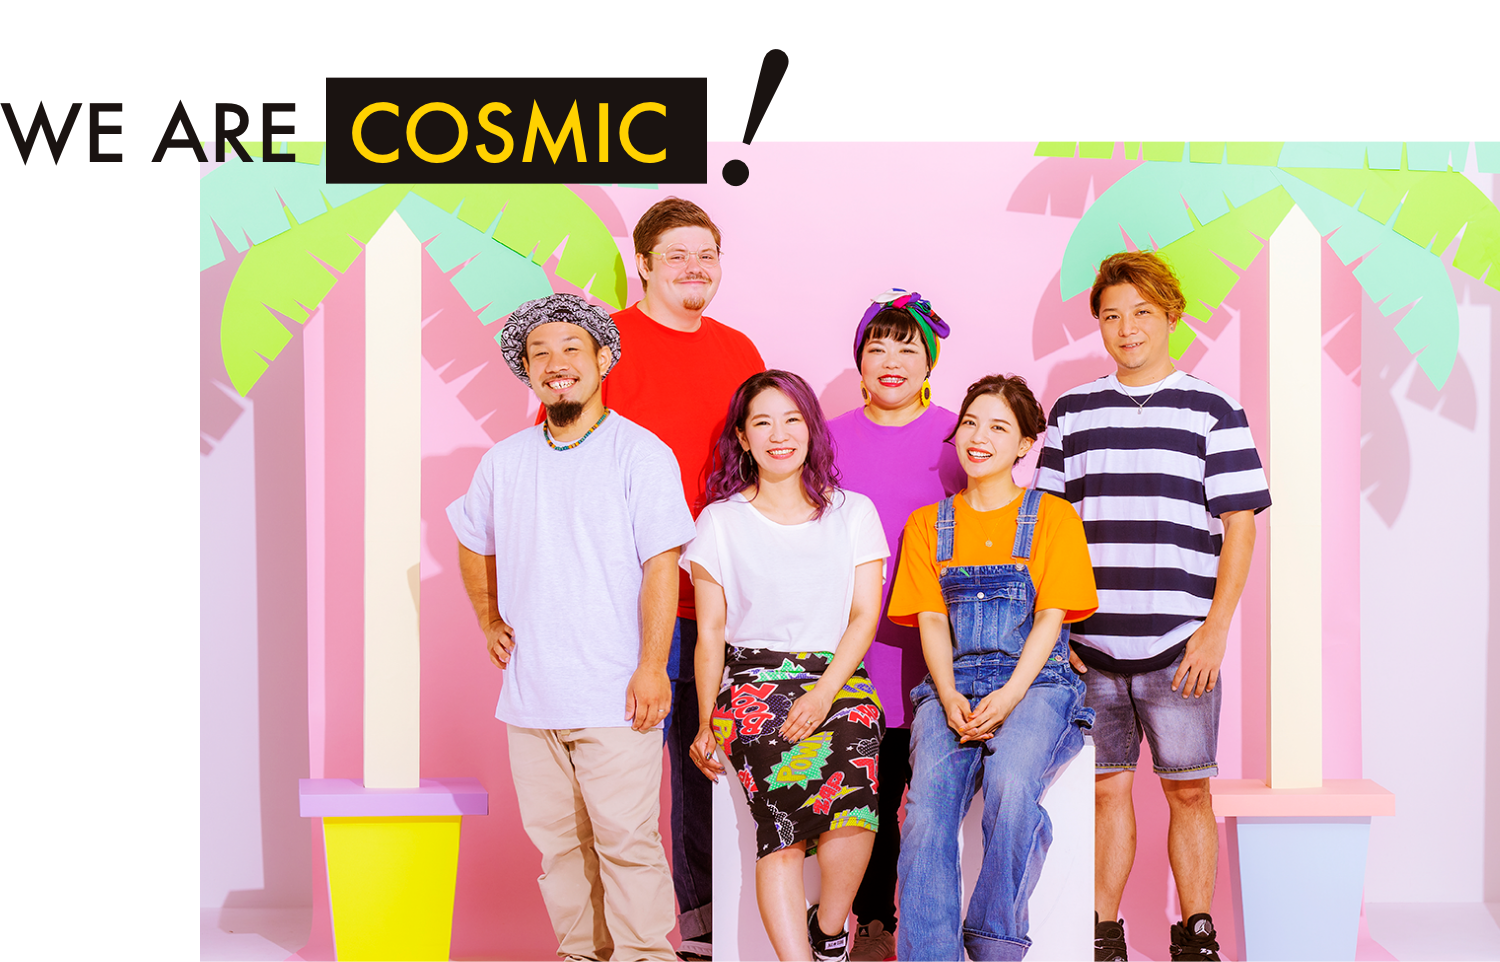 WE ARE COSMIC!